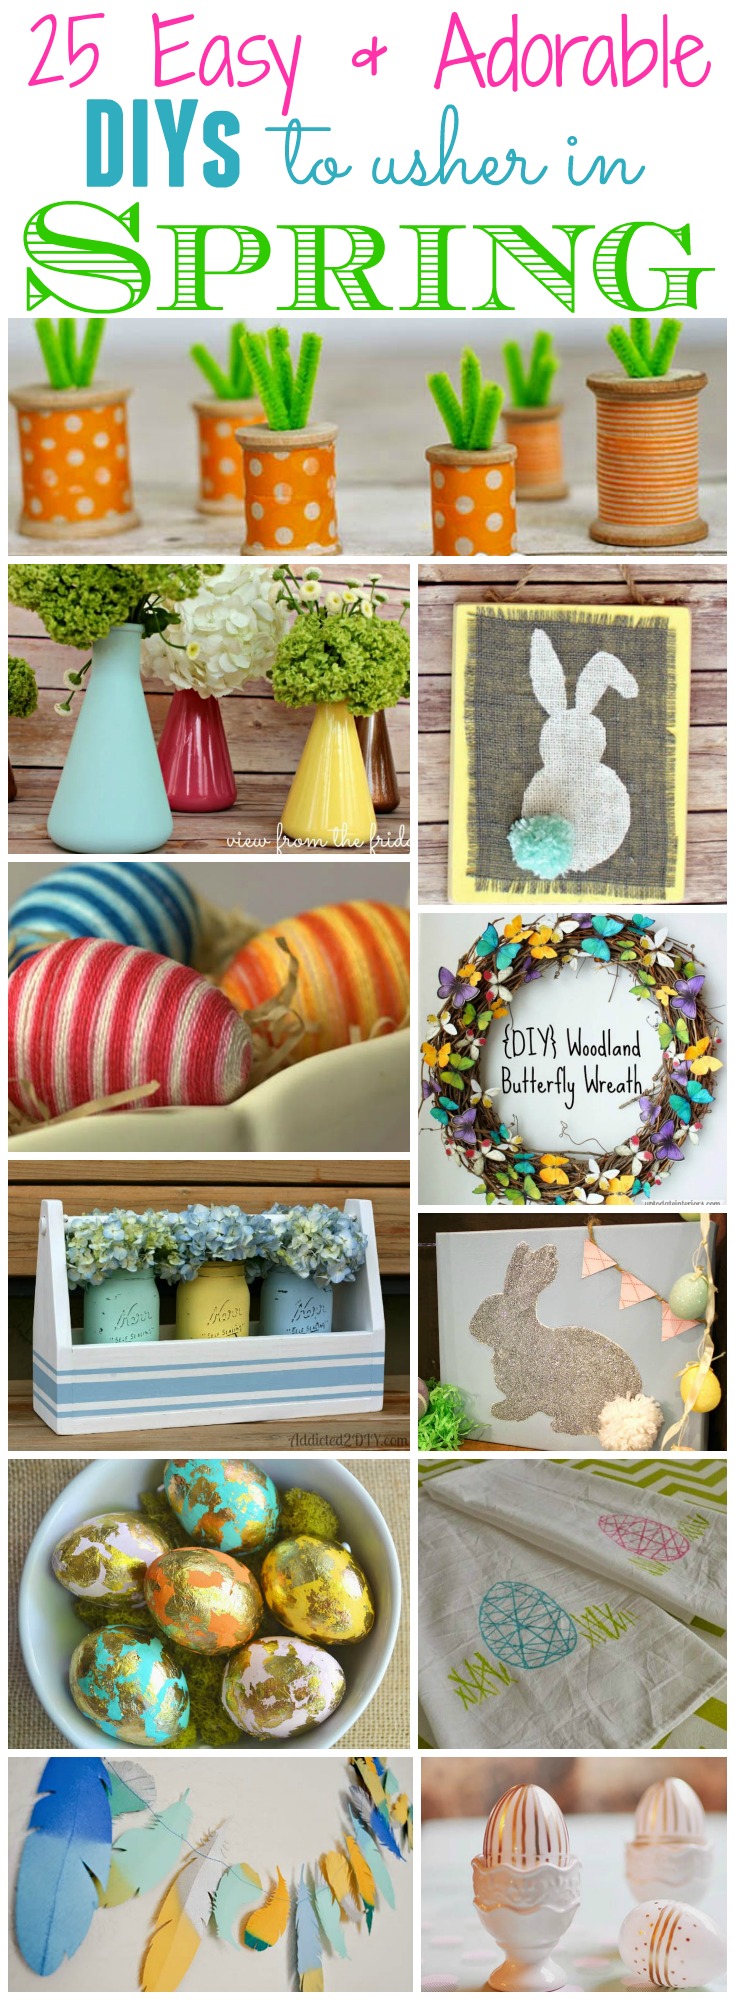 25 Easy and Adorable DIY projects and ideas to usher in spring.